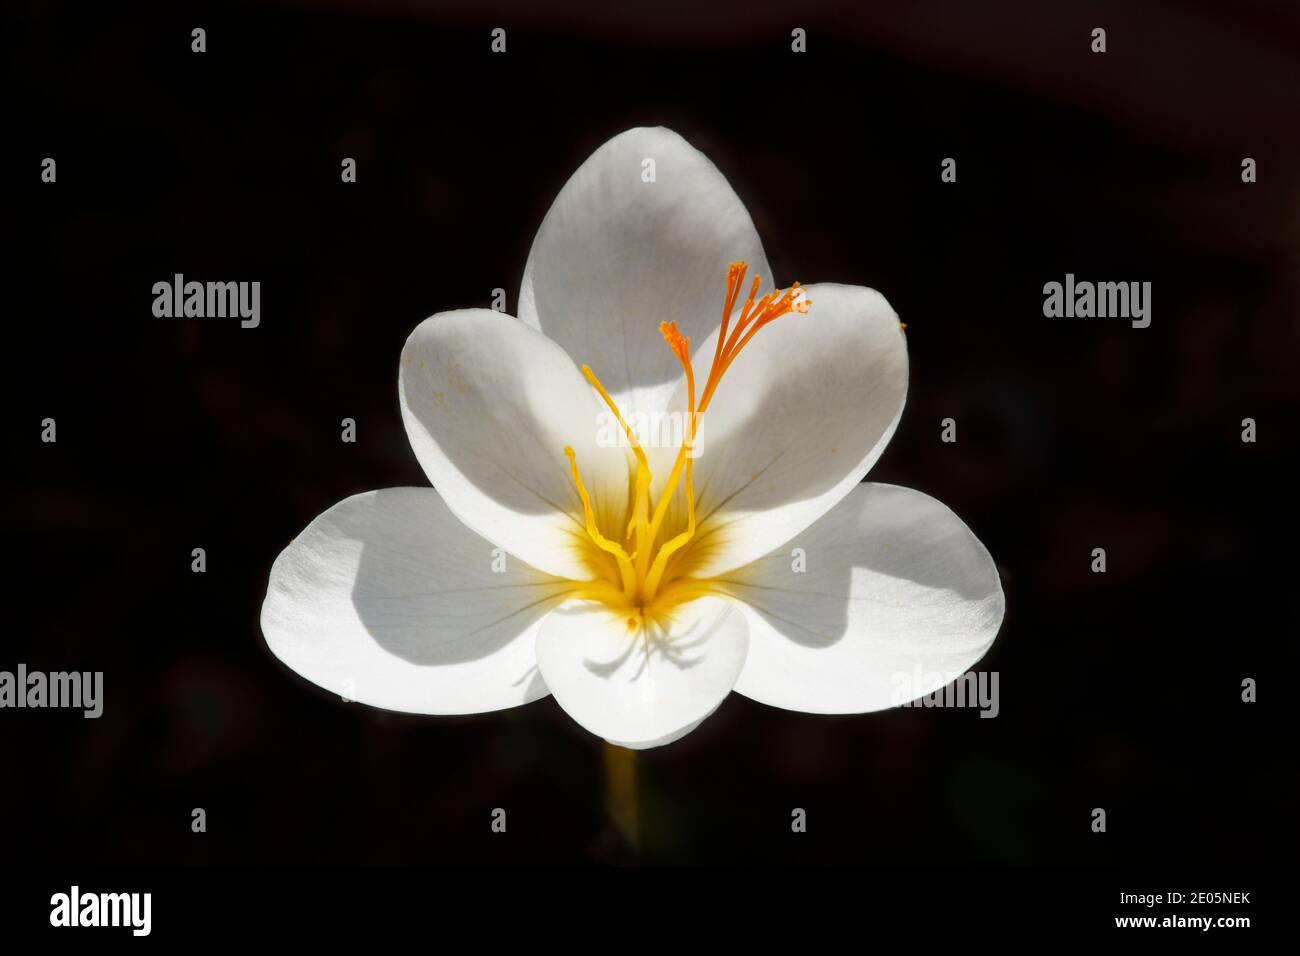 Graphic image of Autumn Crocus (Crocus boryi) set against a very dark background suitable for cards Stock Photo